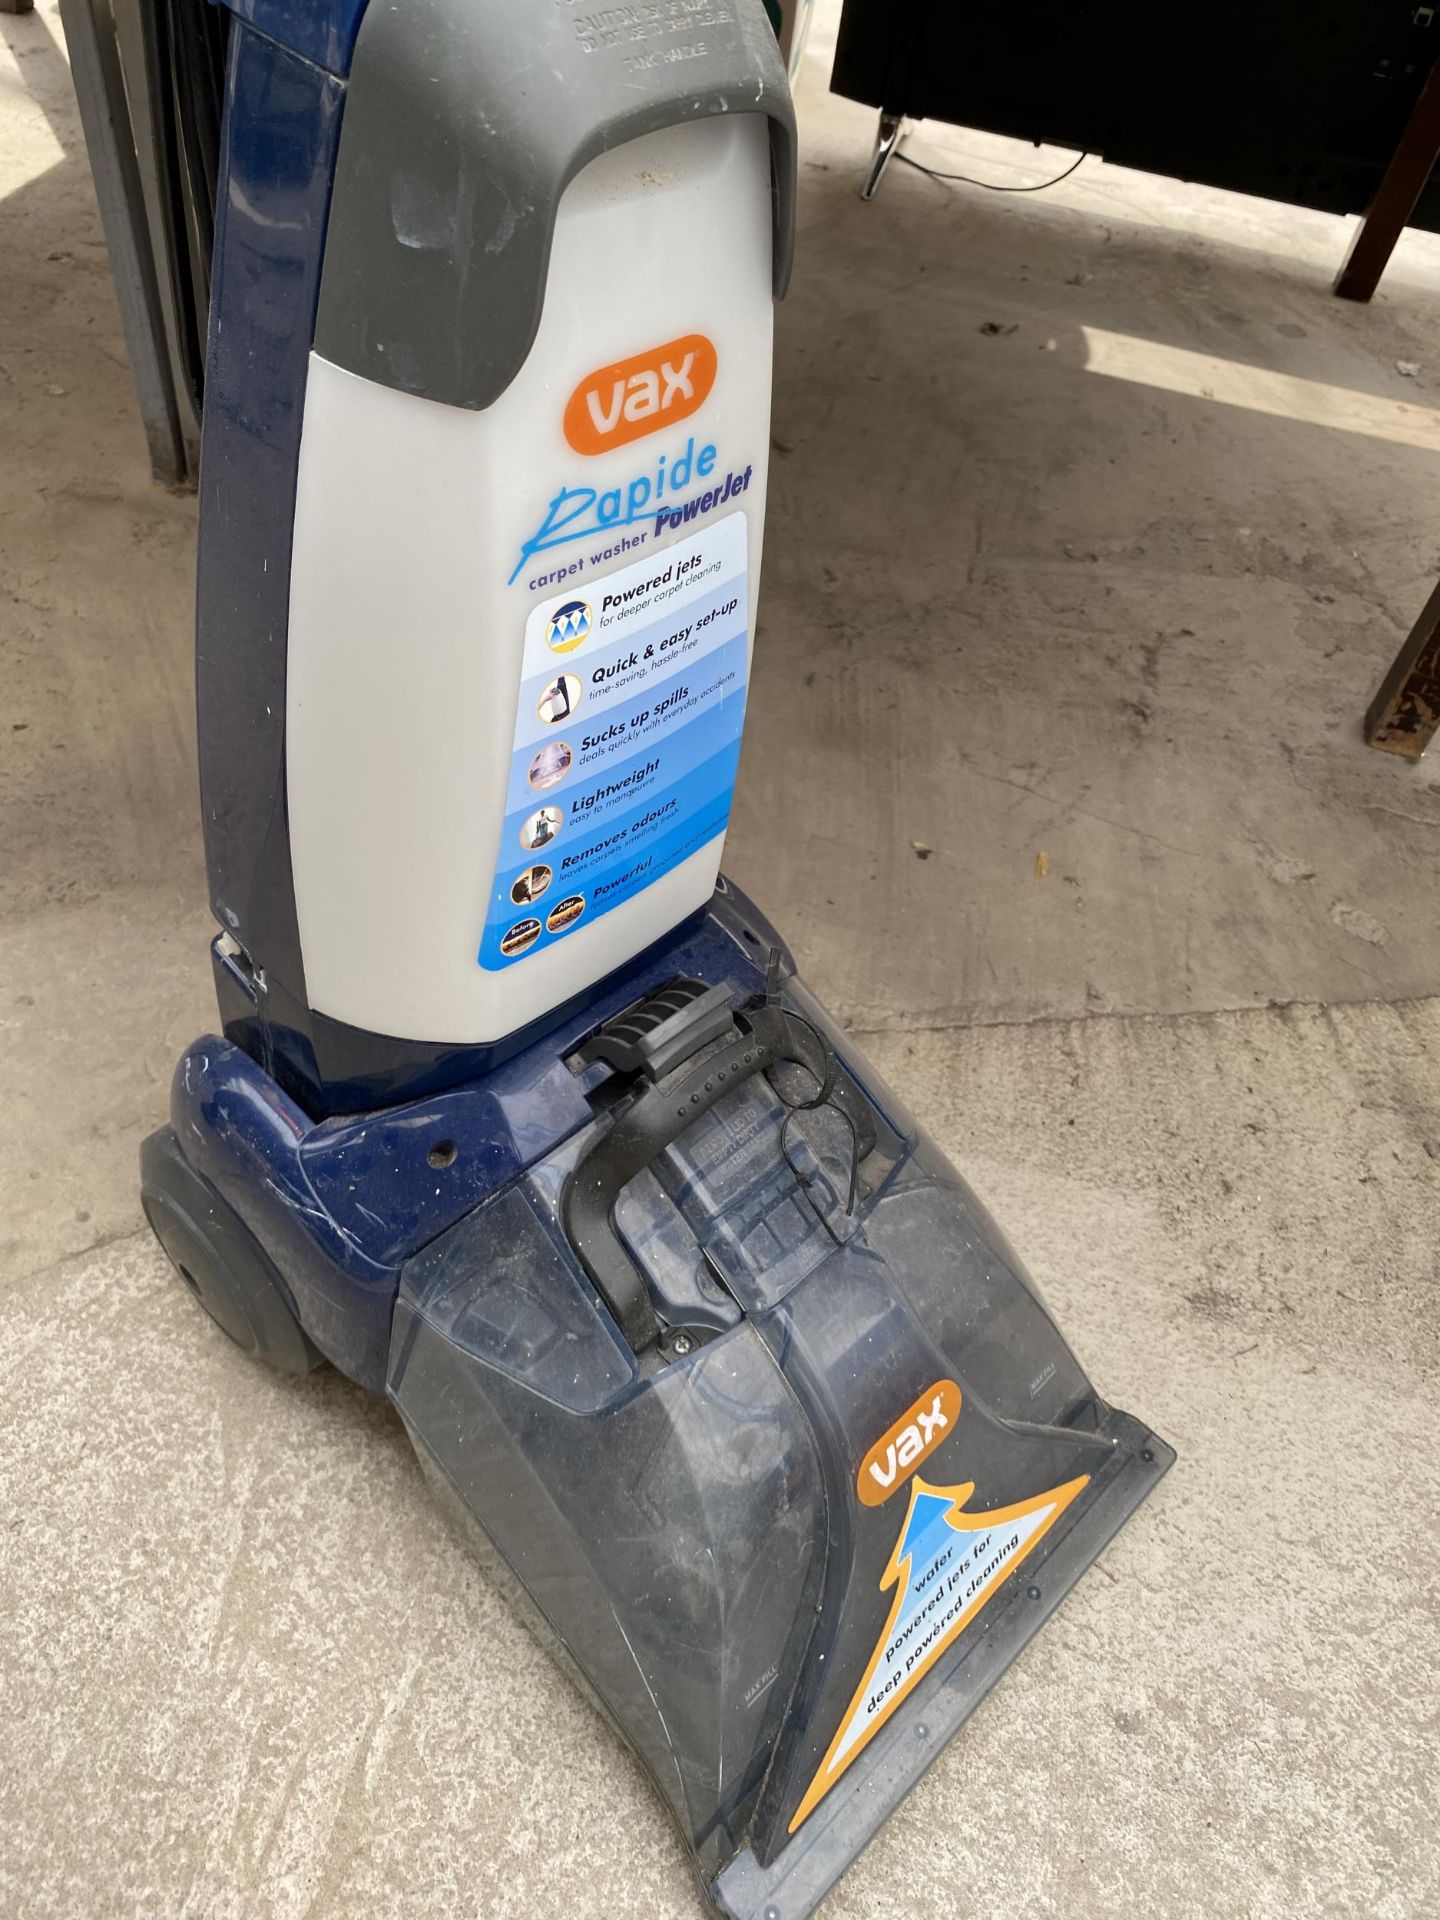 A VAX RAPIDE CARPET CLEANER - Image 2 of 2